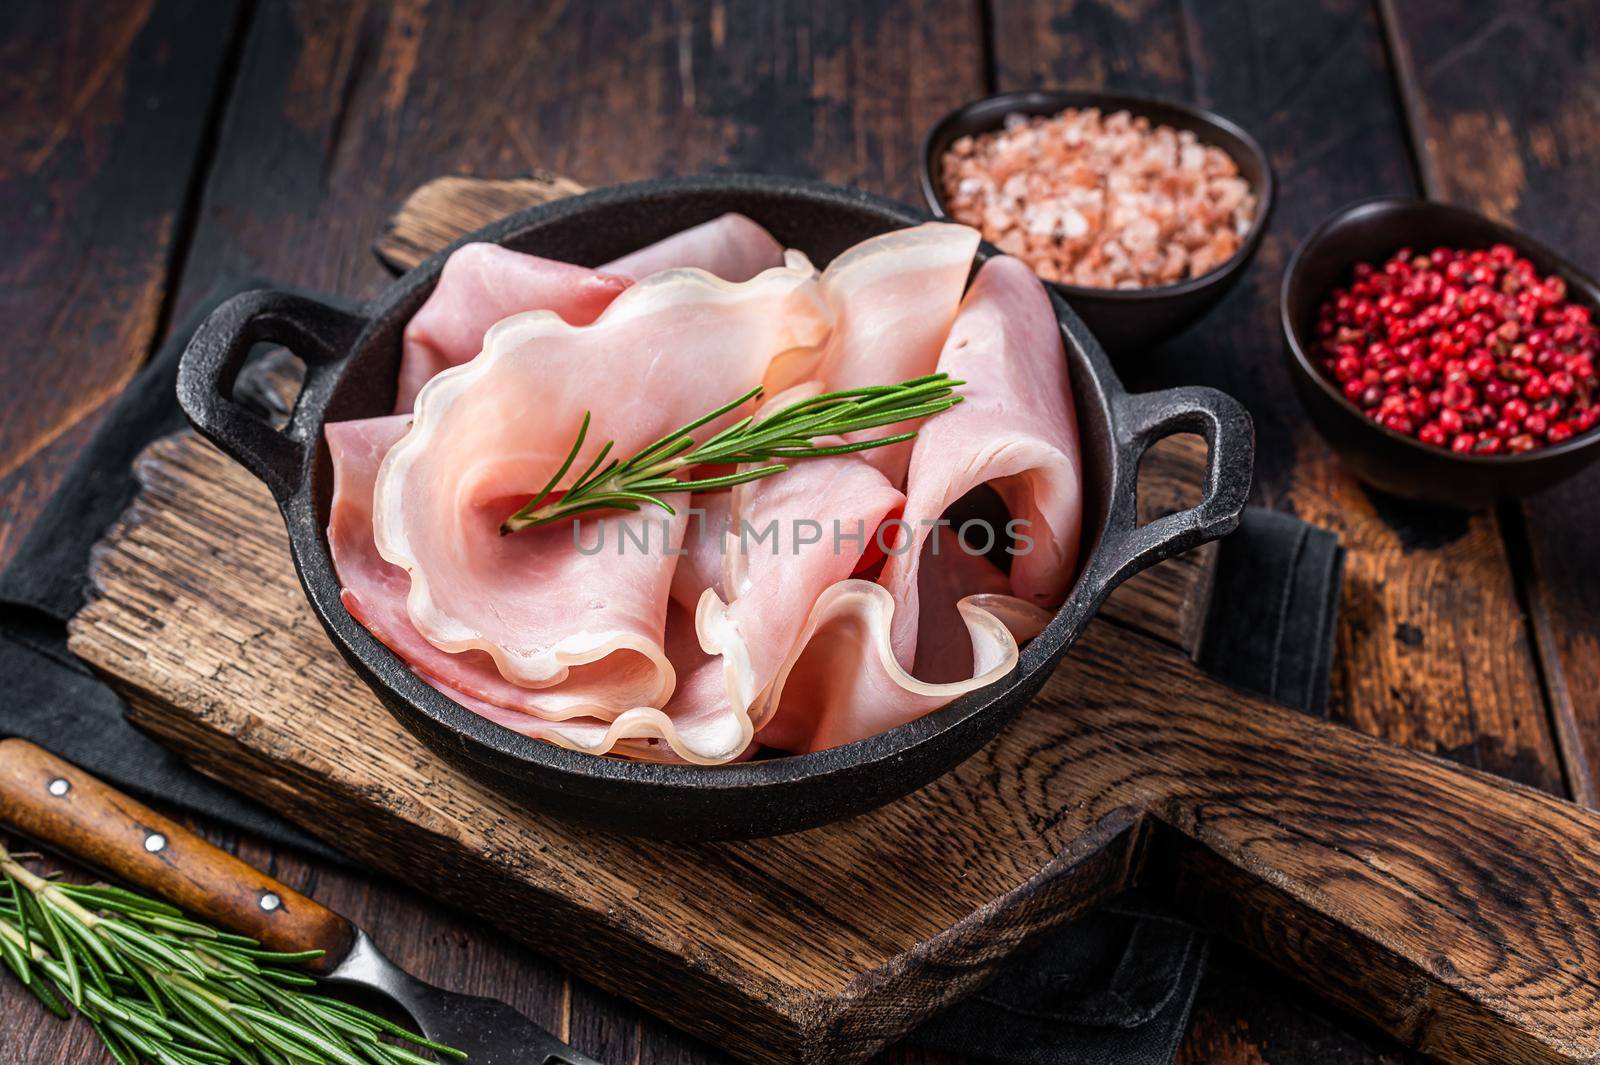 Prosciutto ham sliced in a pan. Dark wooden background. Top view by Composter